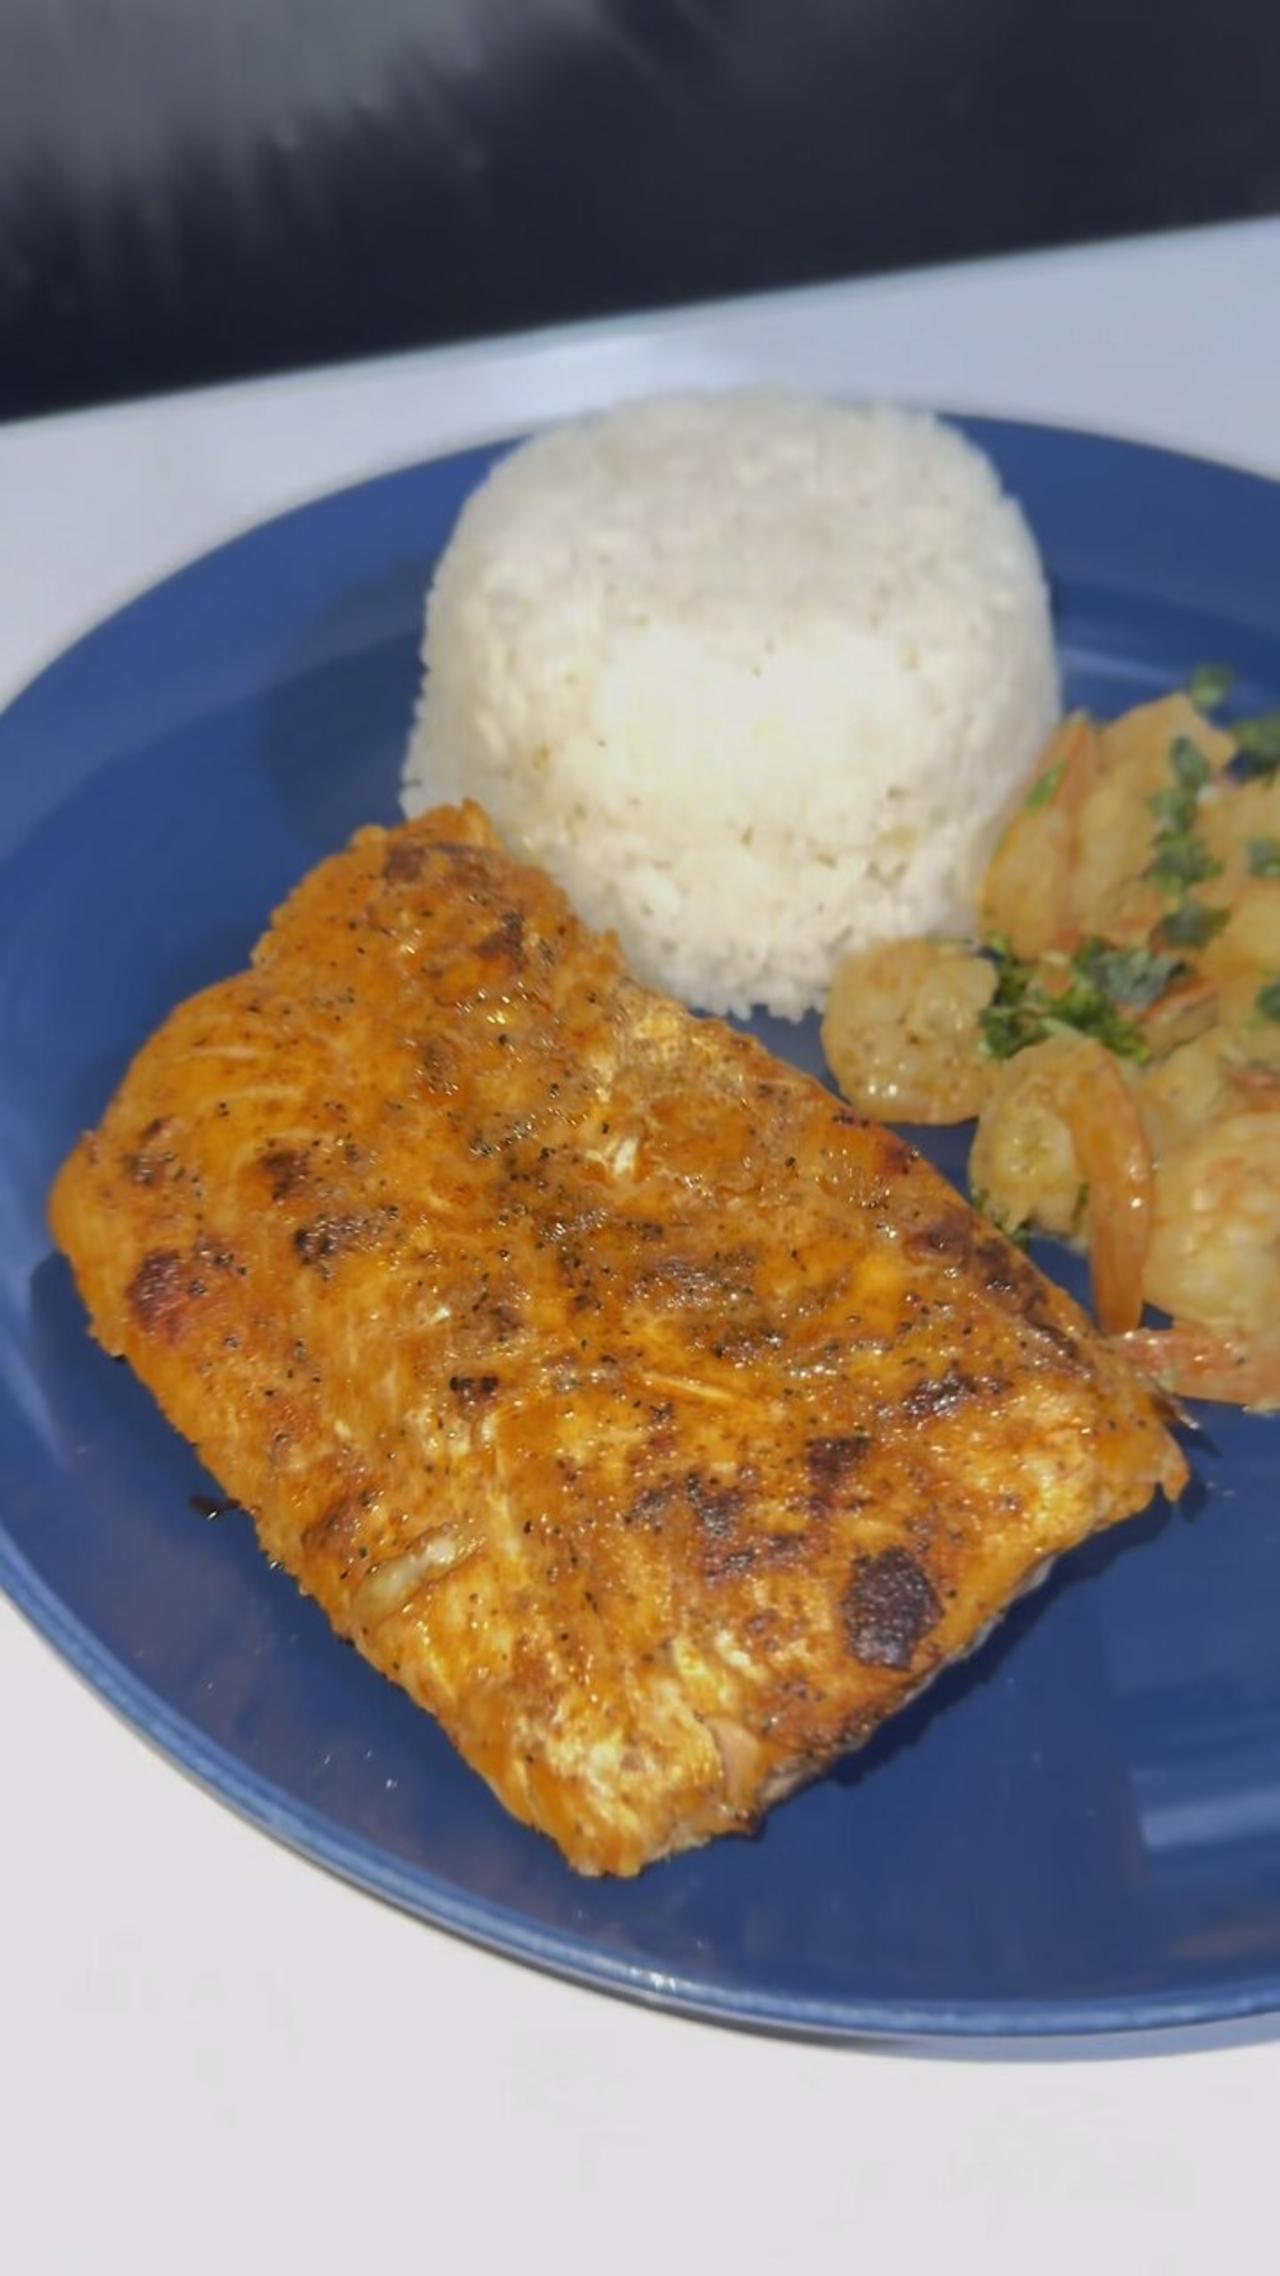 cooking salmon with shrimp and rice